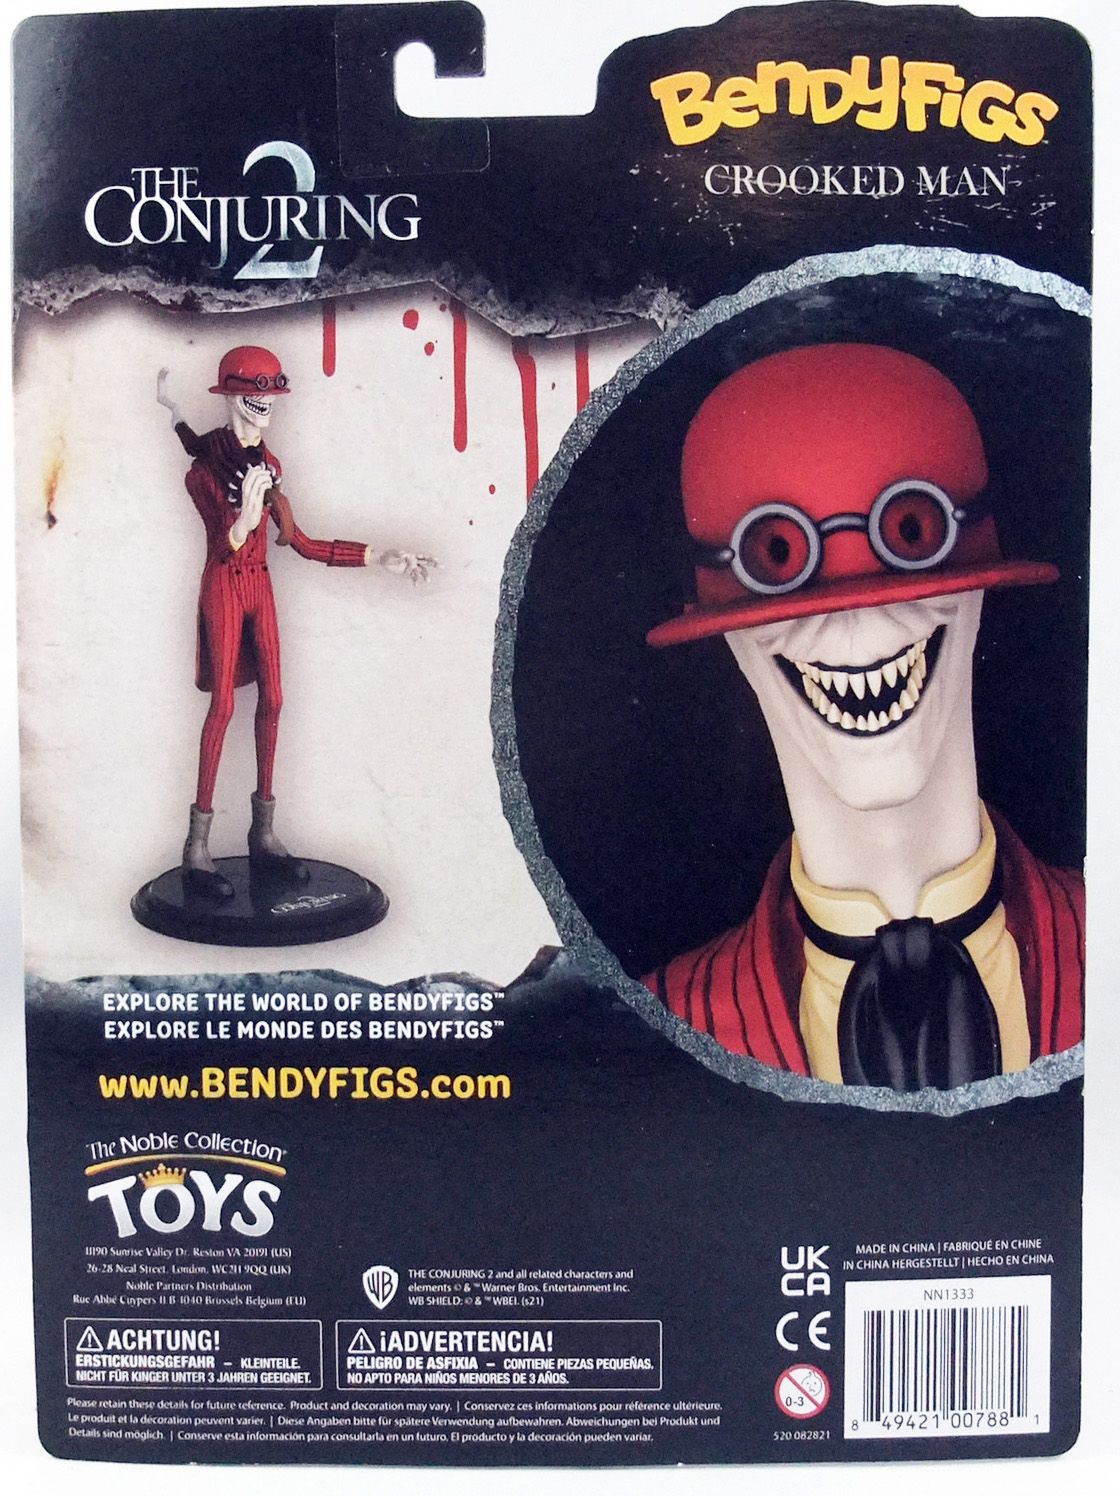 Bendyfigs - The Conjuring 2 - The Crooked Man (2021)